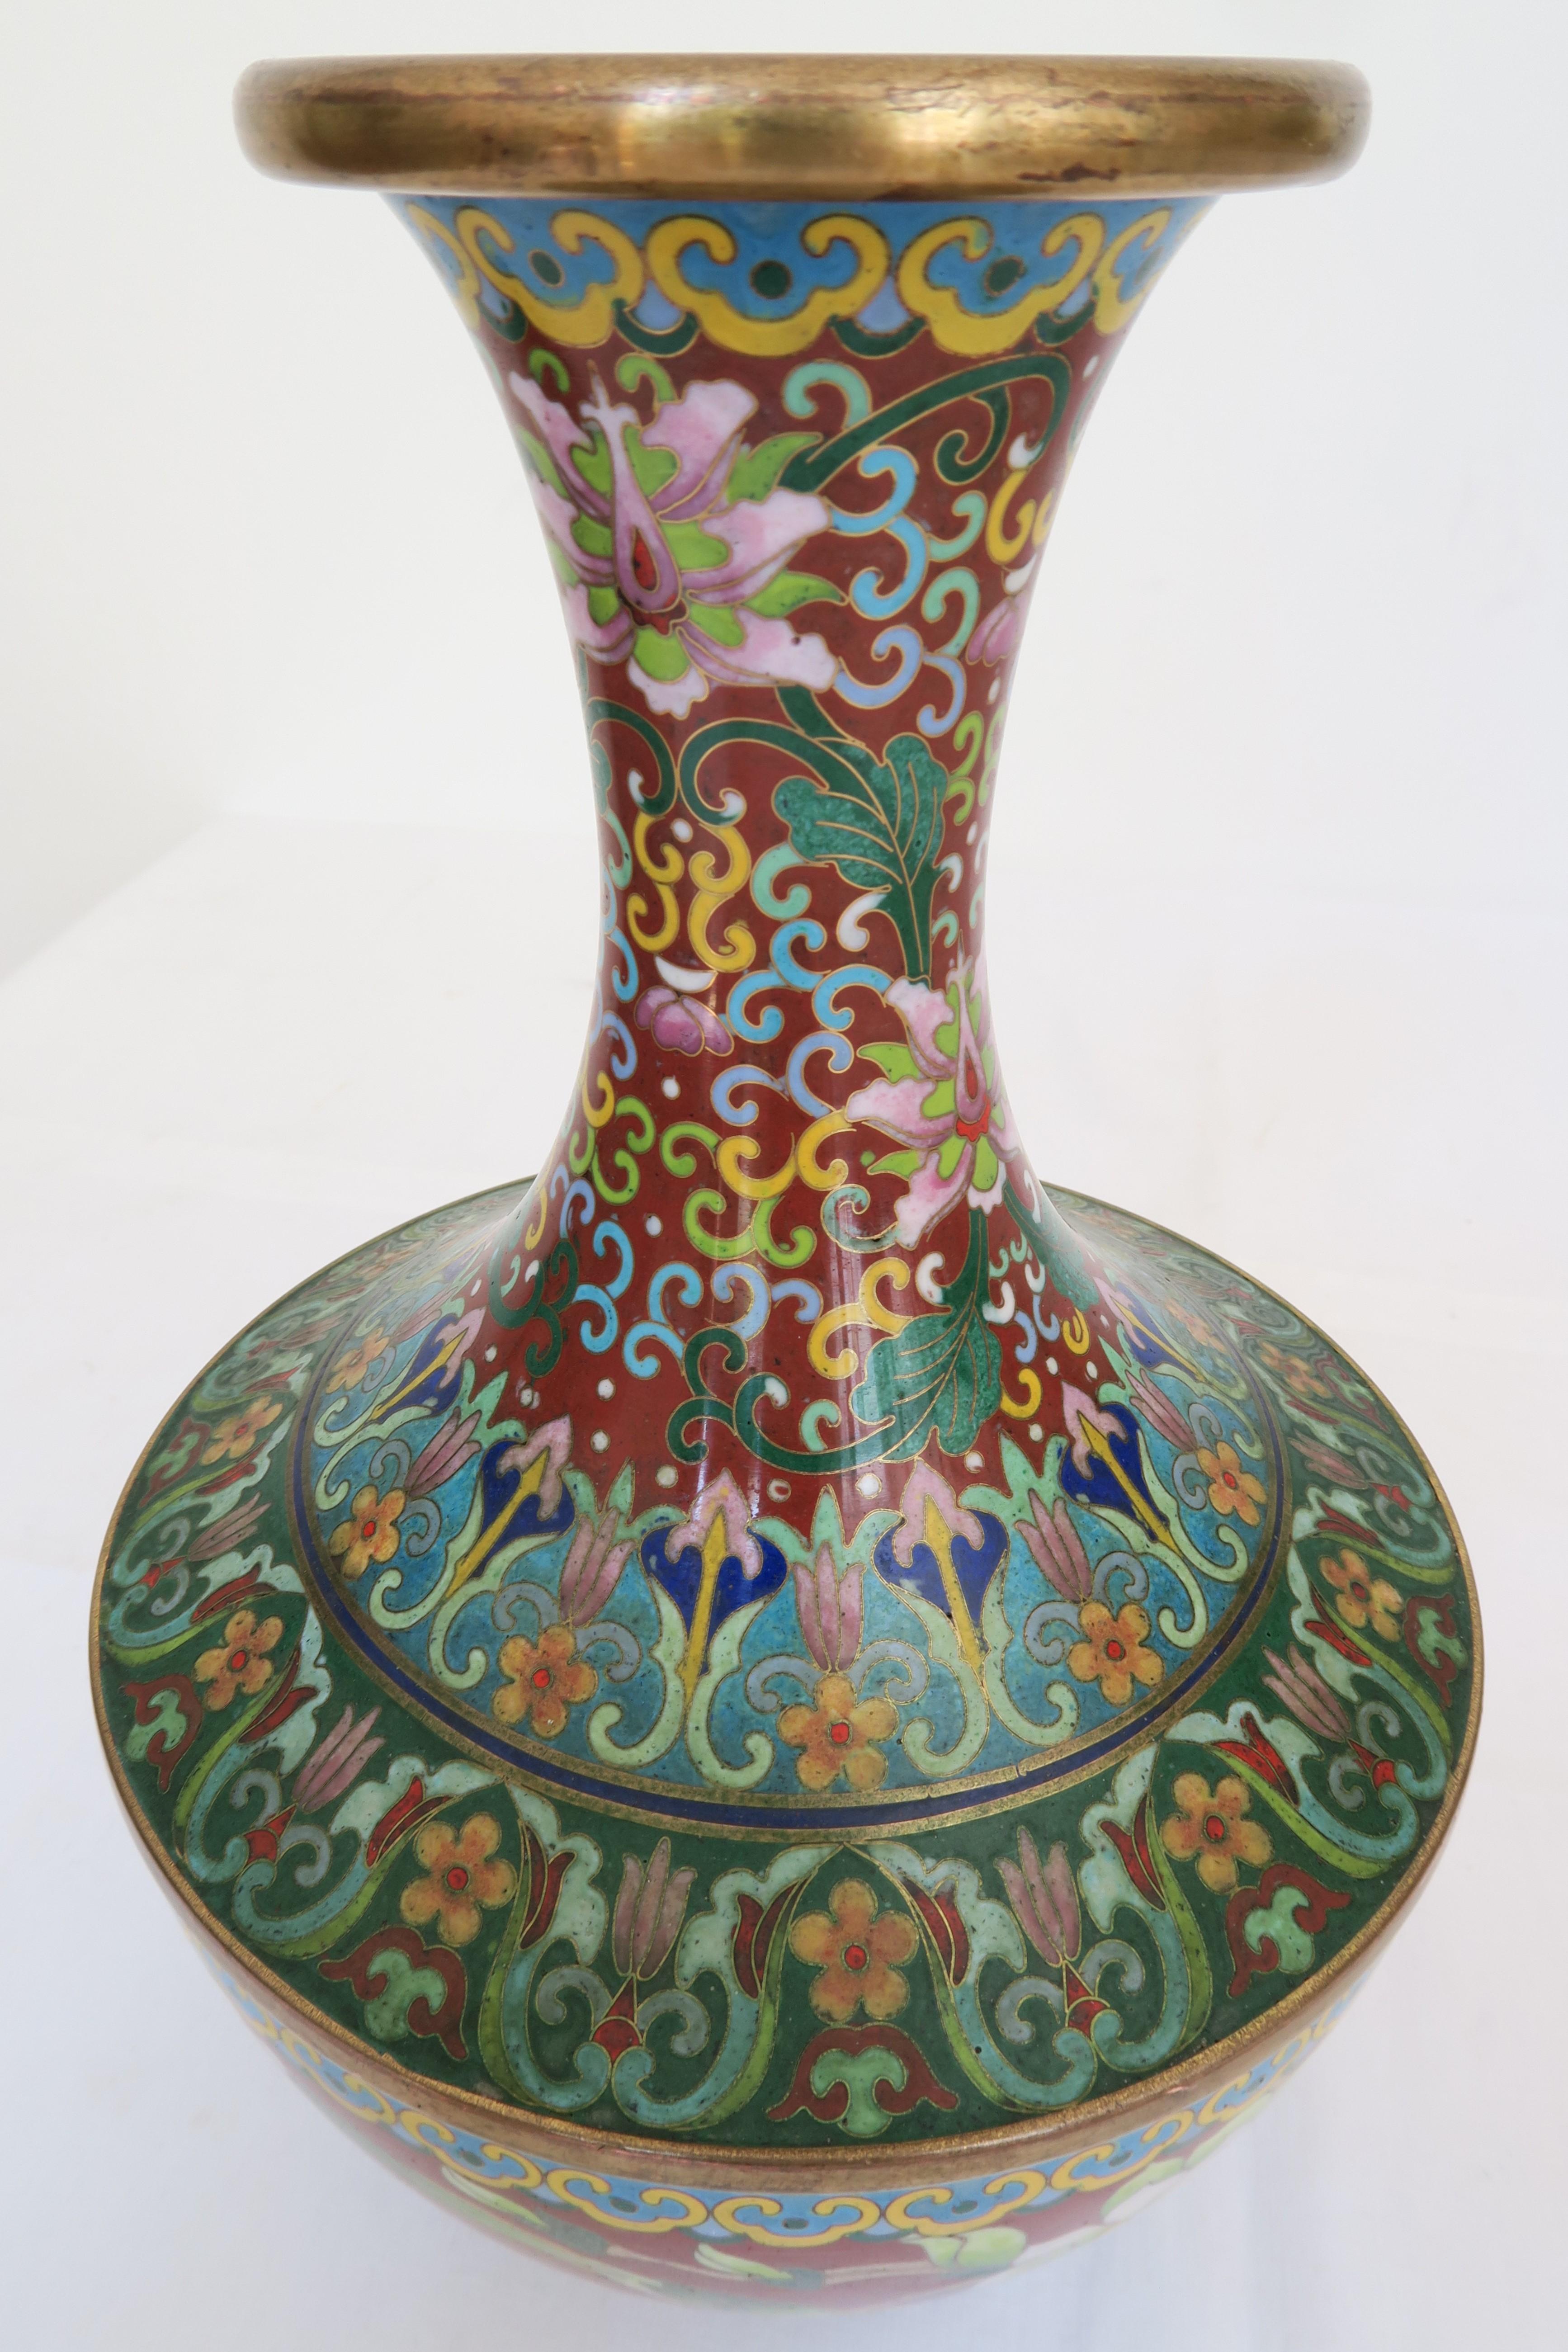 For sale is a cloisonné vase from the late Quing Dynasty (1644-1912). The bulbous walling is embellished with different colour birds, cherry- and apple blossoms over waves and generous floral ornamentation. On the neck of the vase one can also find